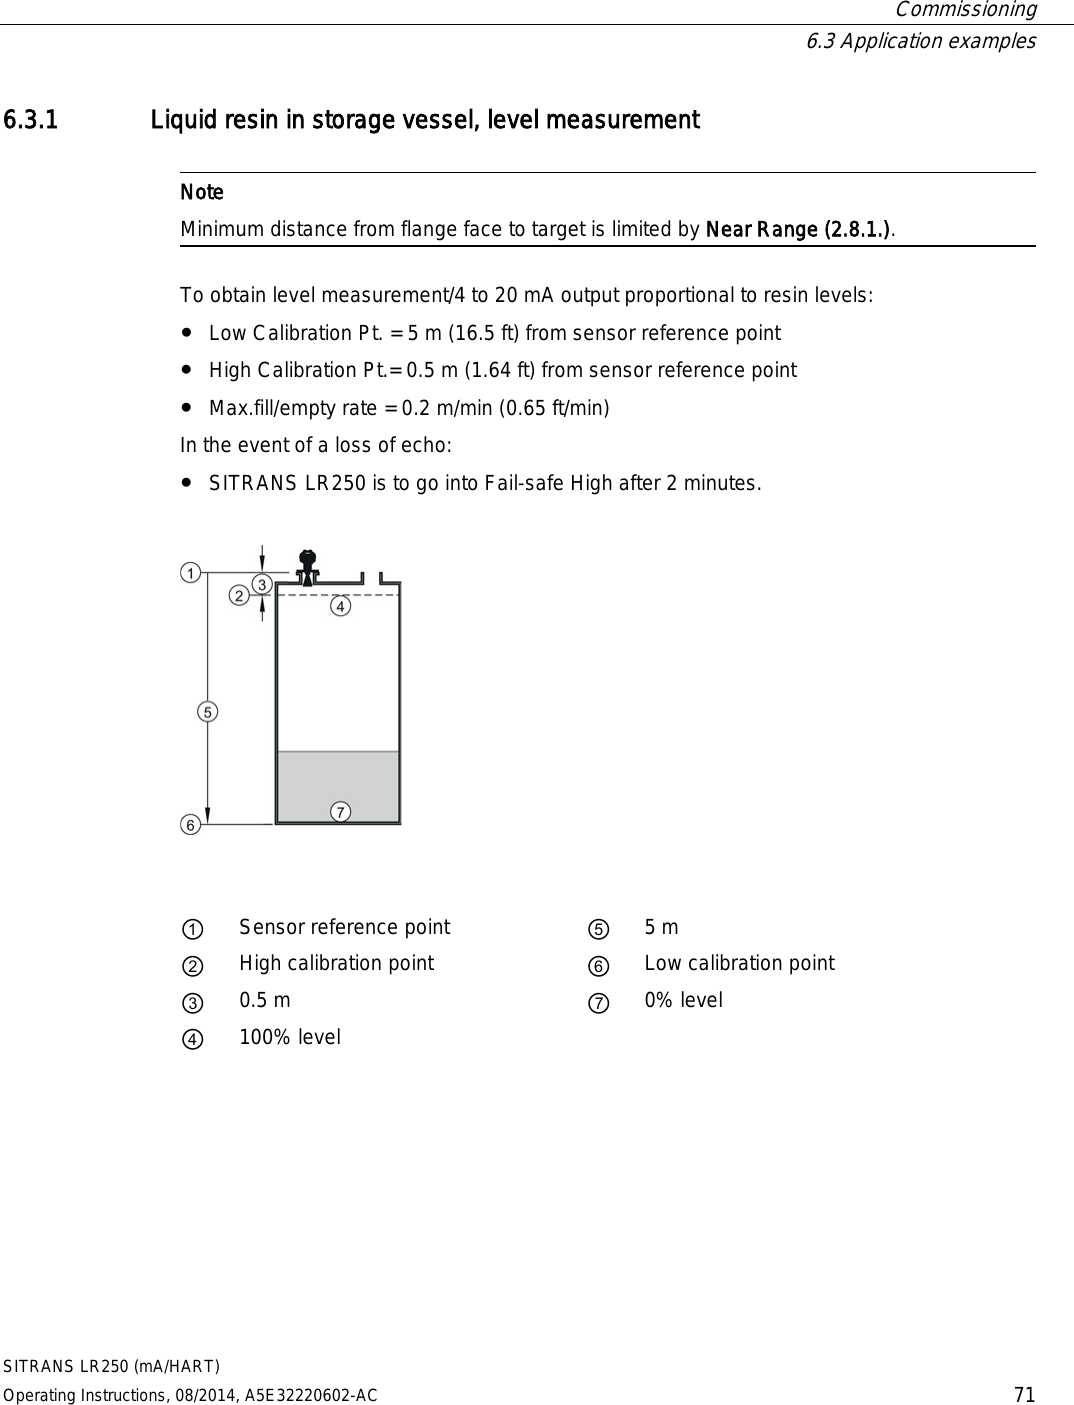  Commissioning  6.3 Application examples SITRANS LR250 (mA/HART) Operating Instructions, 08/2014, A5E32220602-AC 71 6.3.1 Liquid resin in storage vessel, level measurement   Note Minimum distance from flange face to target is limited by Near Range (2.8.1.).  To obtain level measurement/4 to 20 mA output proportional to resin levels: ● Low Calibration Pt. = 5 m (16.5 ft) from sensor reference point ● High Calibration Pt.= 0.5 m (1.64 ft) from sensor reference point ● Max.fill/empty rate = 0.2 m/min (0.65 ft/min) In the event of a loss of echo:  ● SITRANS LR250 is to go into Fail-safe High after 2 minutes.       ① Sensor reference point ⑤ 5 m ② High calibration point ⑥ Low calibration point ③ 0.5 m ⑦ 0% level ④ 100% level    